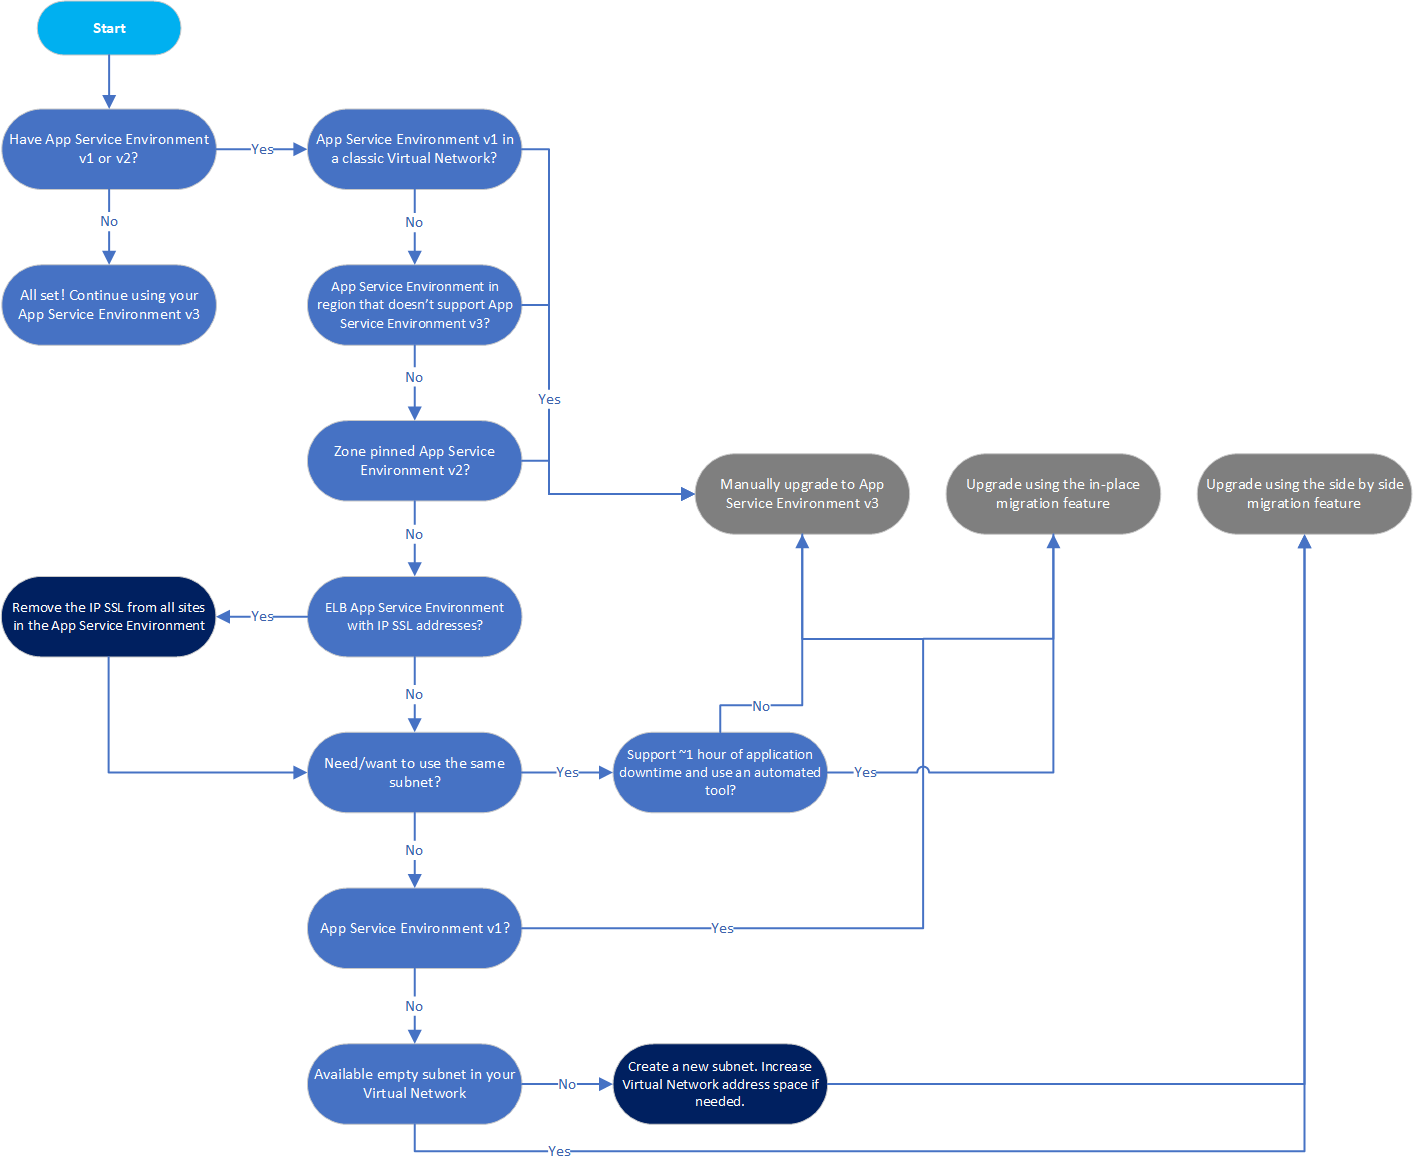 Screenshot of the decision tree for helping decide which App Service Environment upgrade option to use.